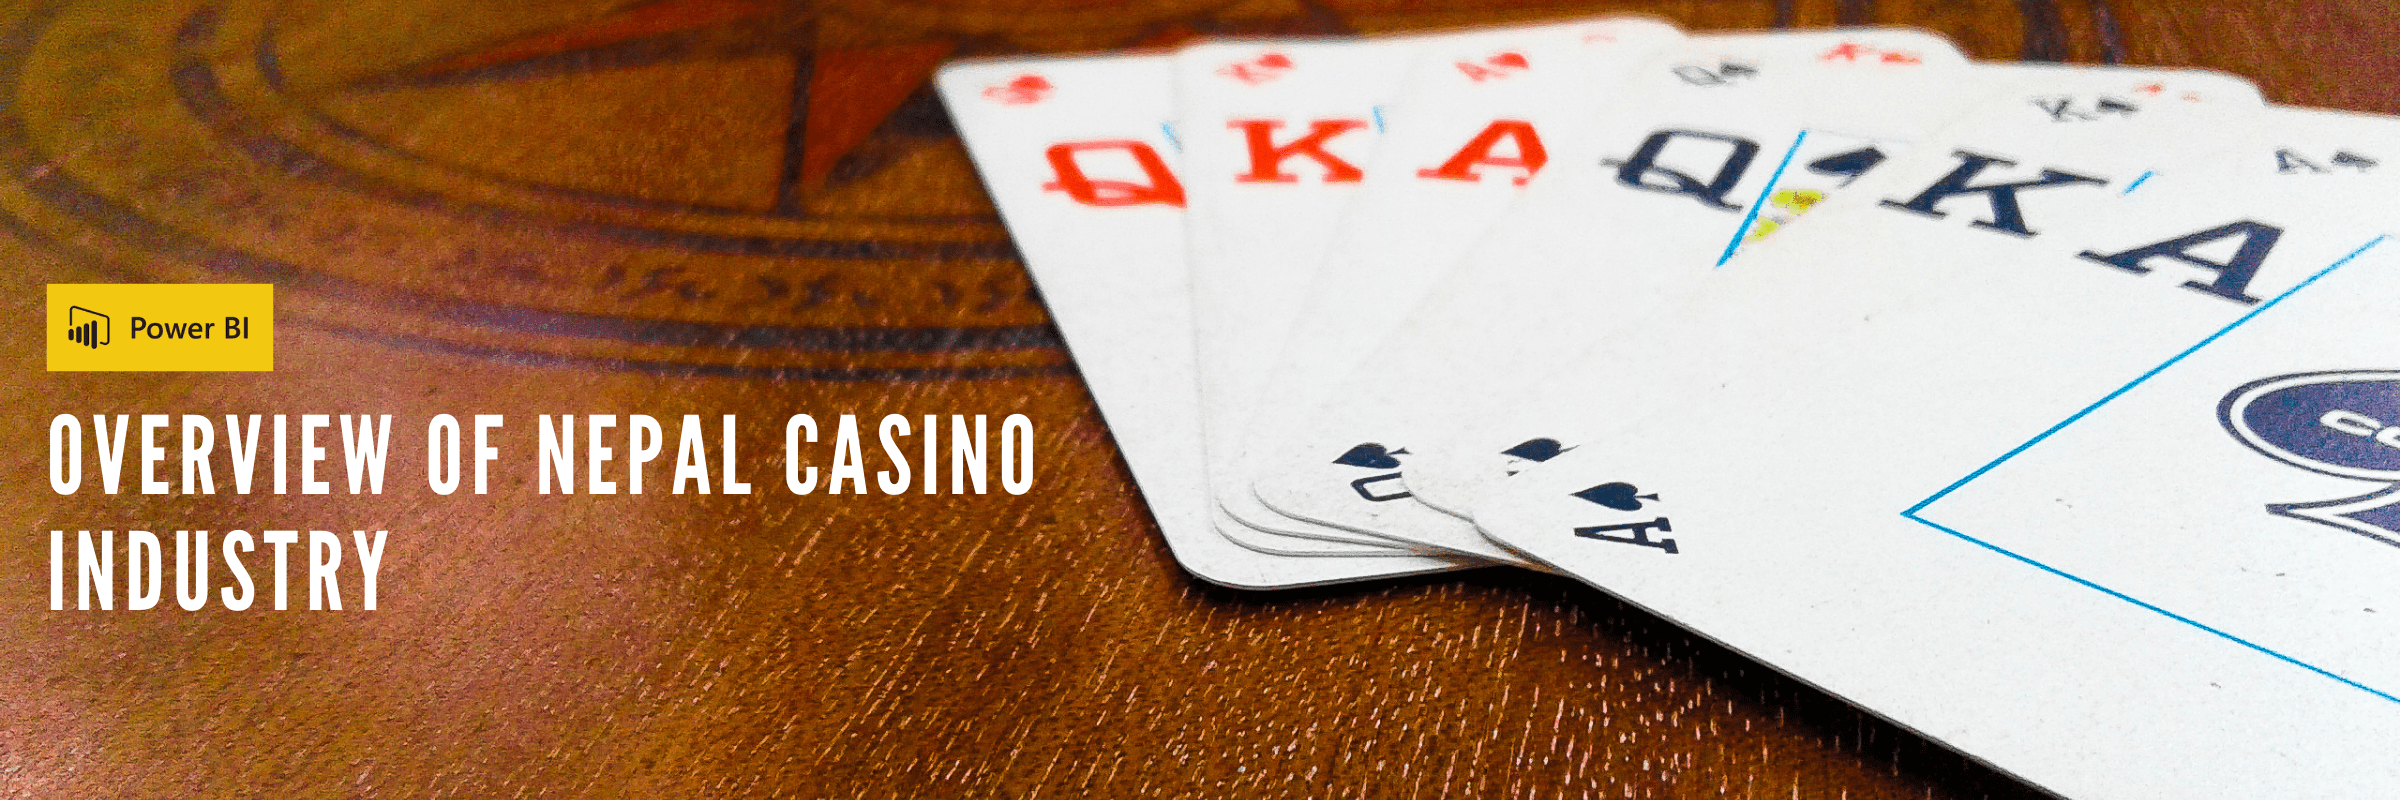 Overview of Casino Industry in Nepal